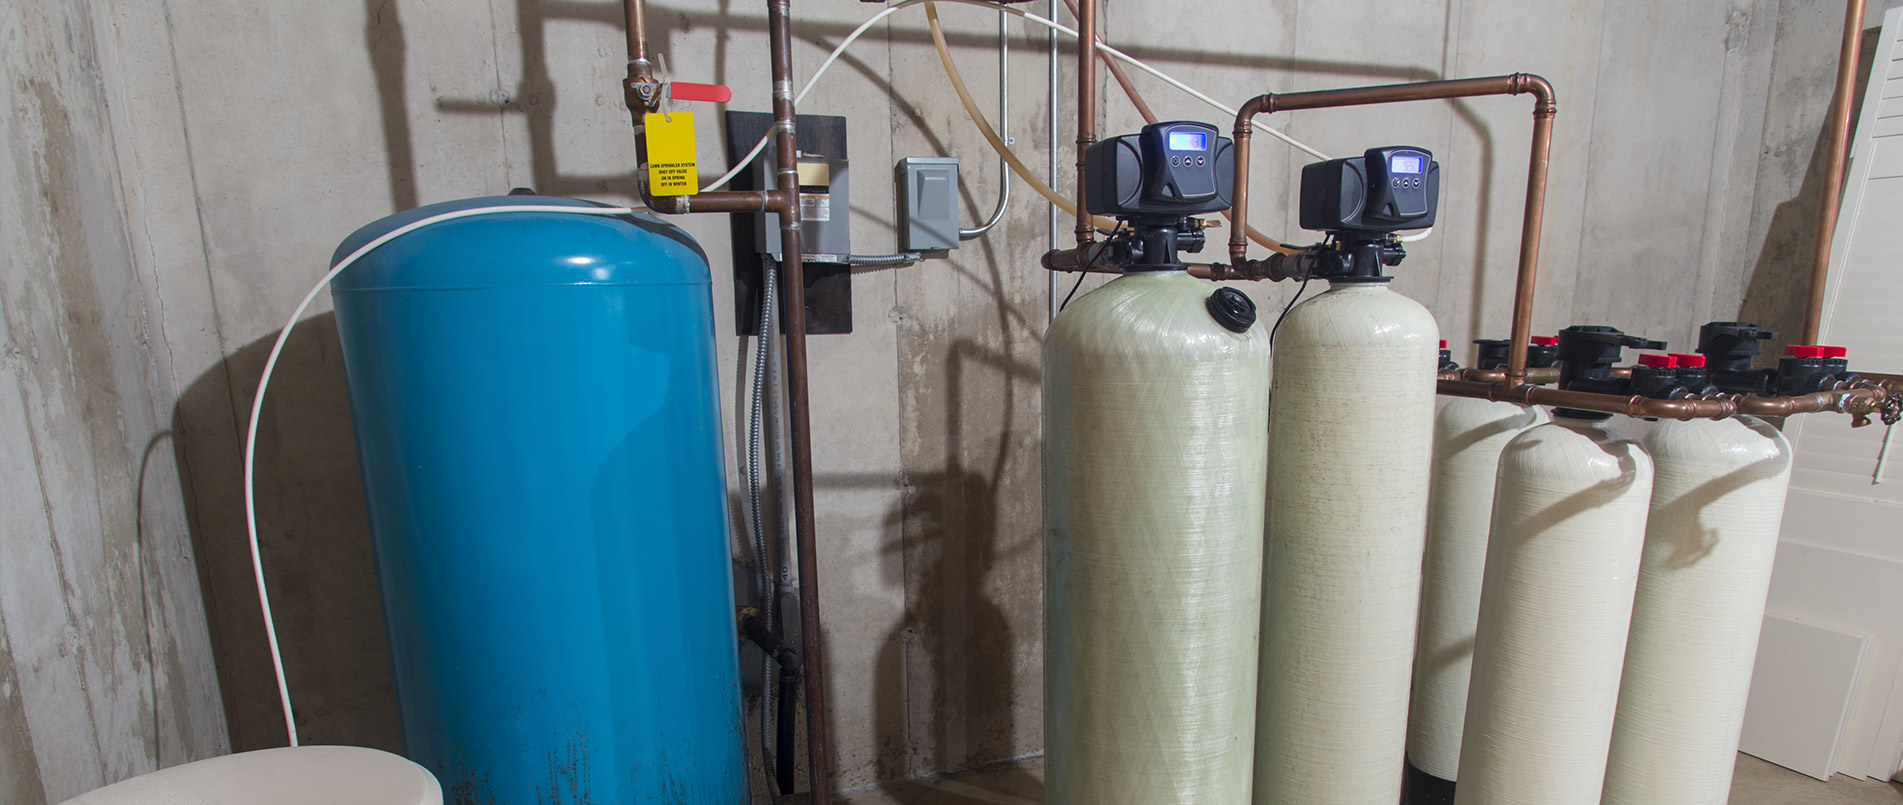 Everpure Residential Water Filter Systems